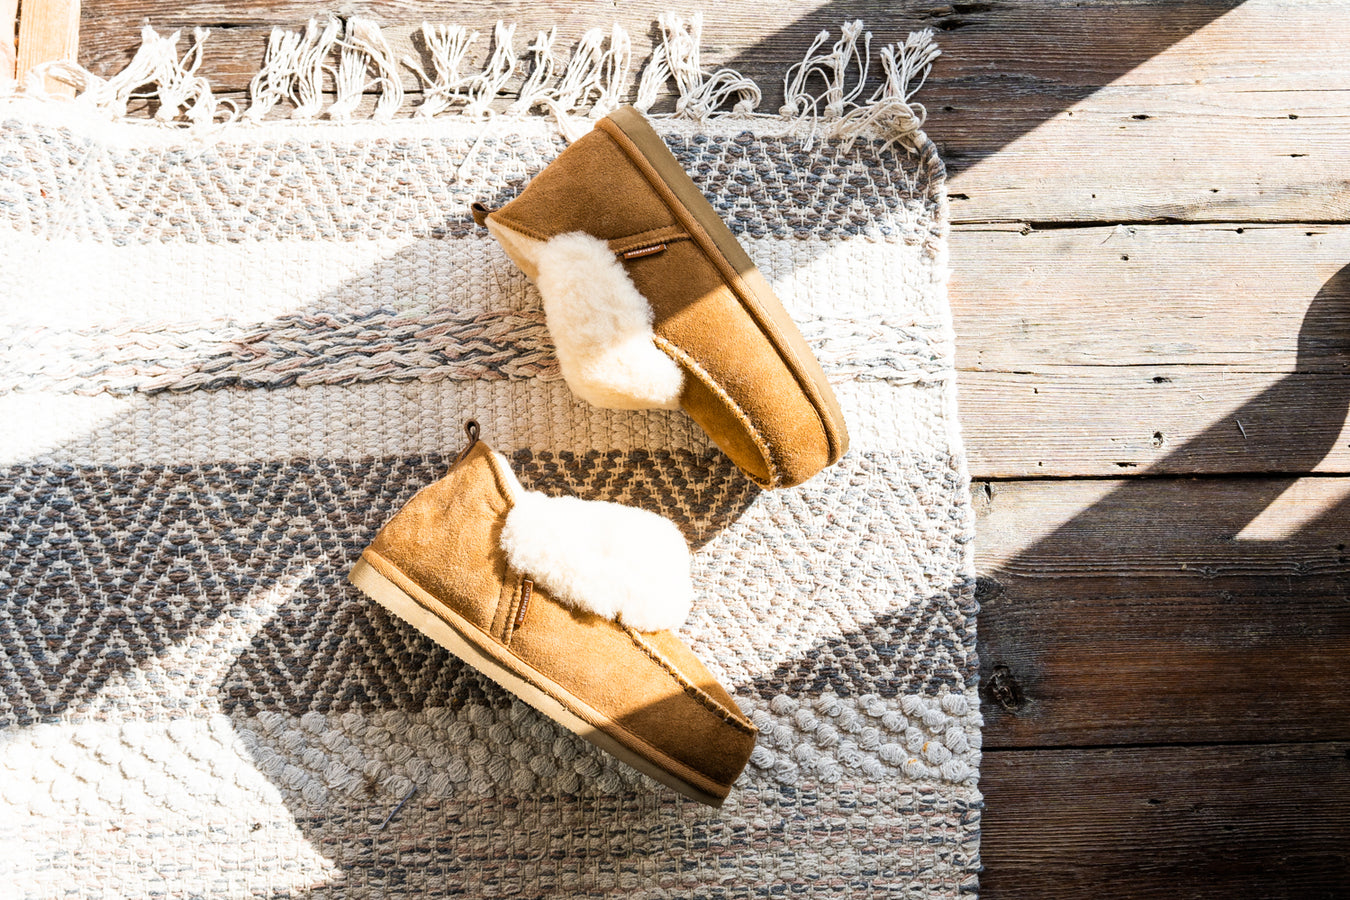 Albina Camel Women's Slippers, made by Shepherd of Sweden. Features a White Sheepskin Cuff and a Hard Sole.